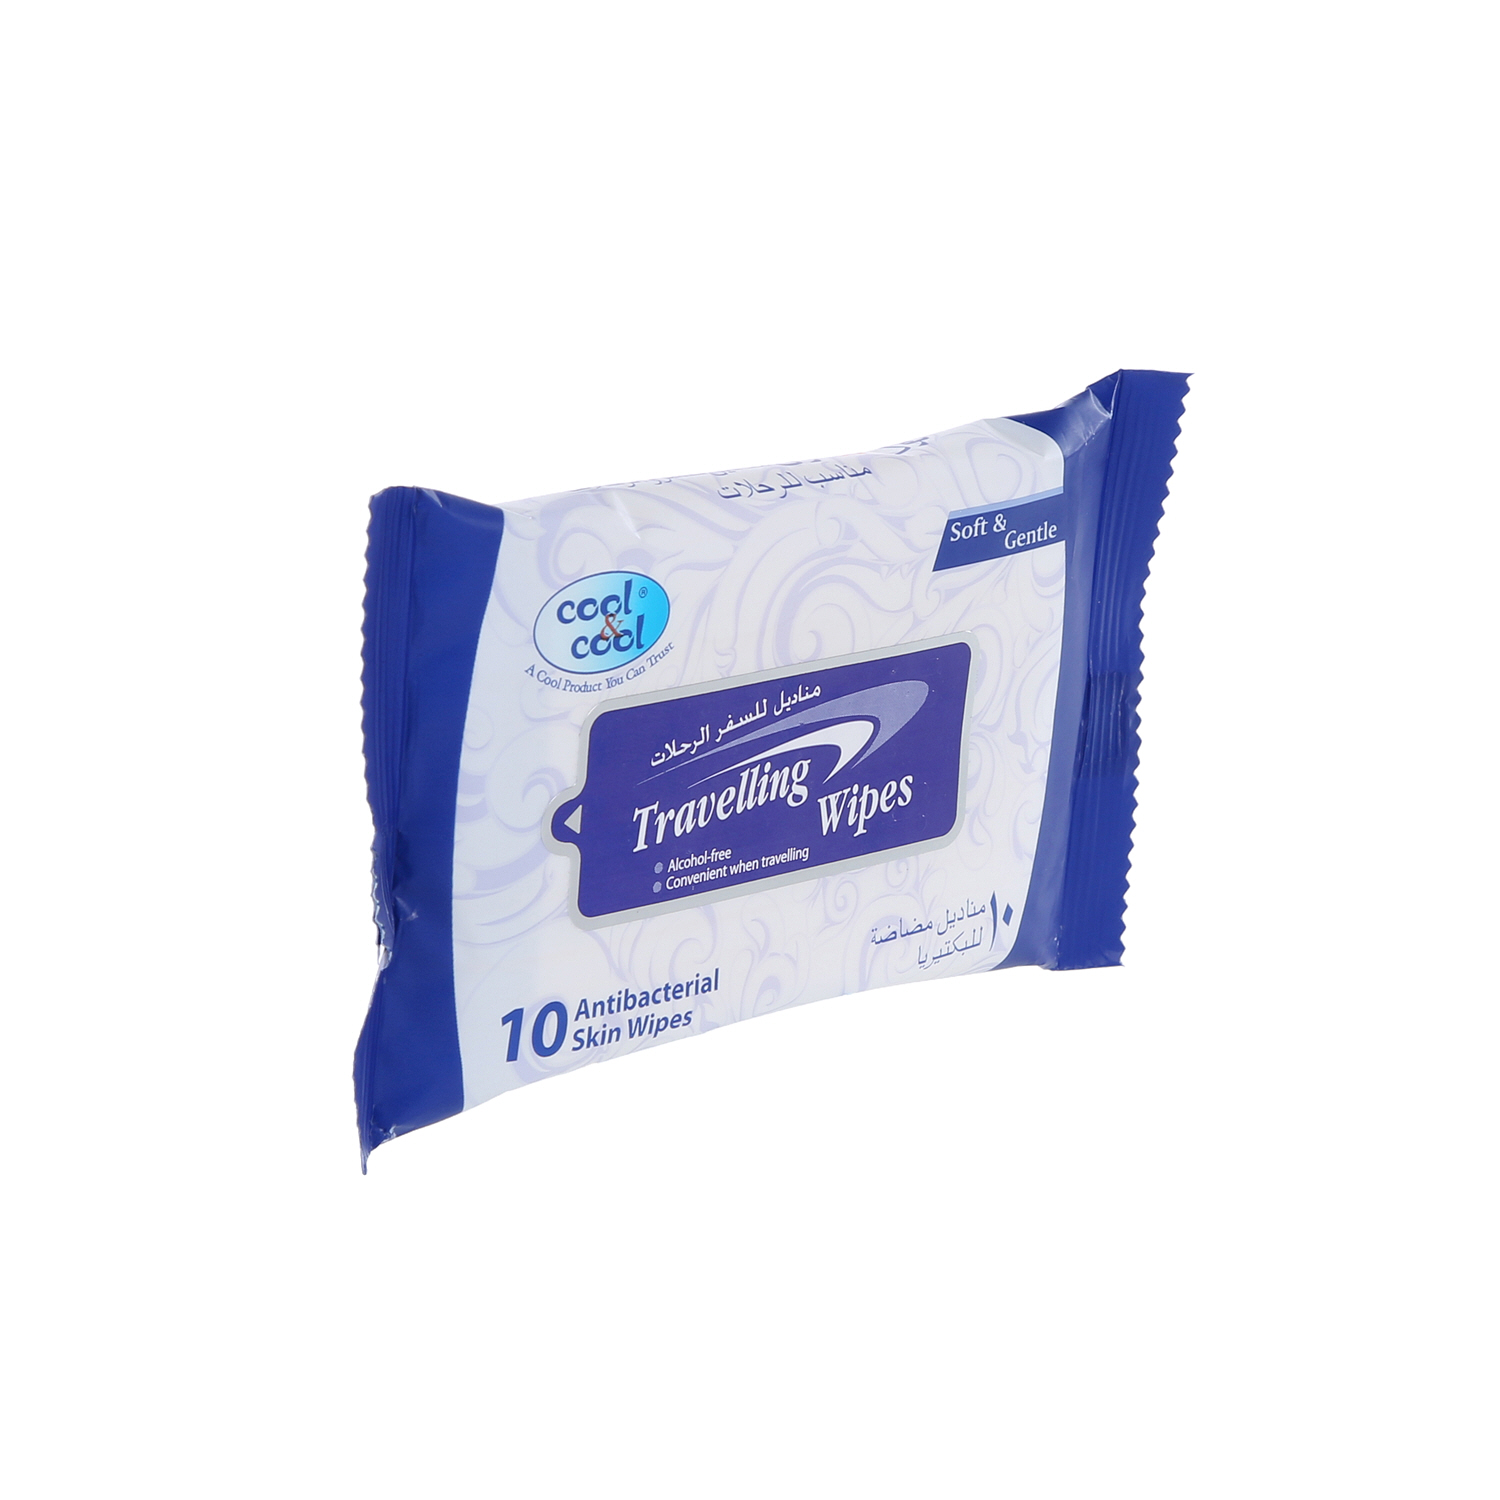 Cool&Cool Travelling Wipes 10Wipes